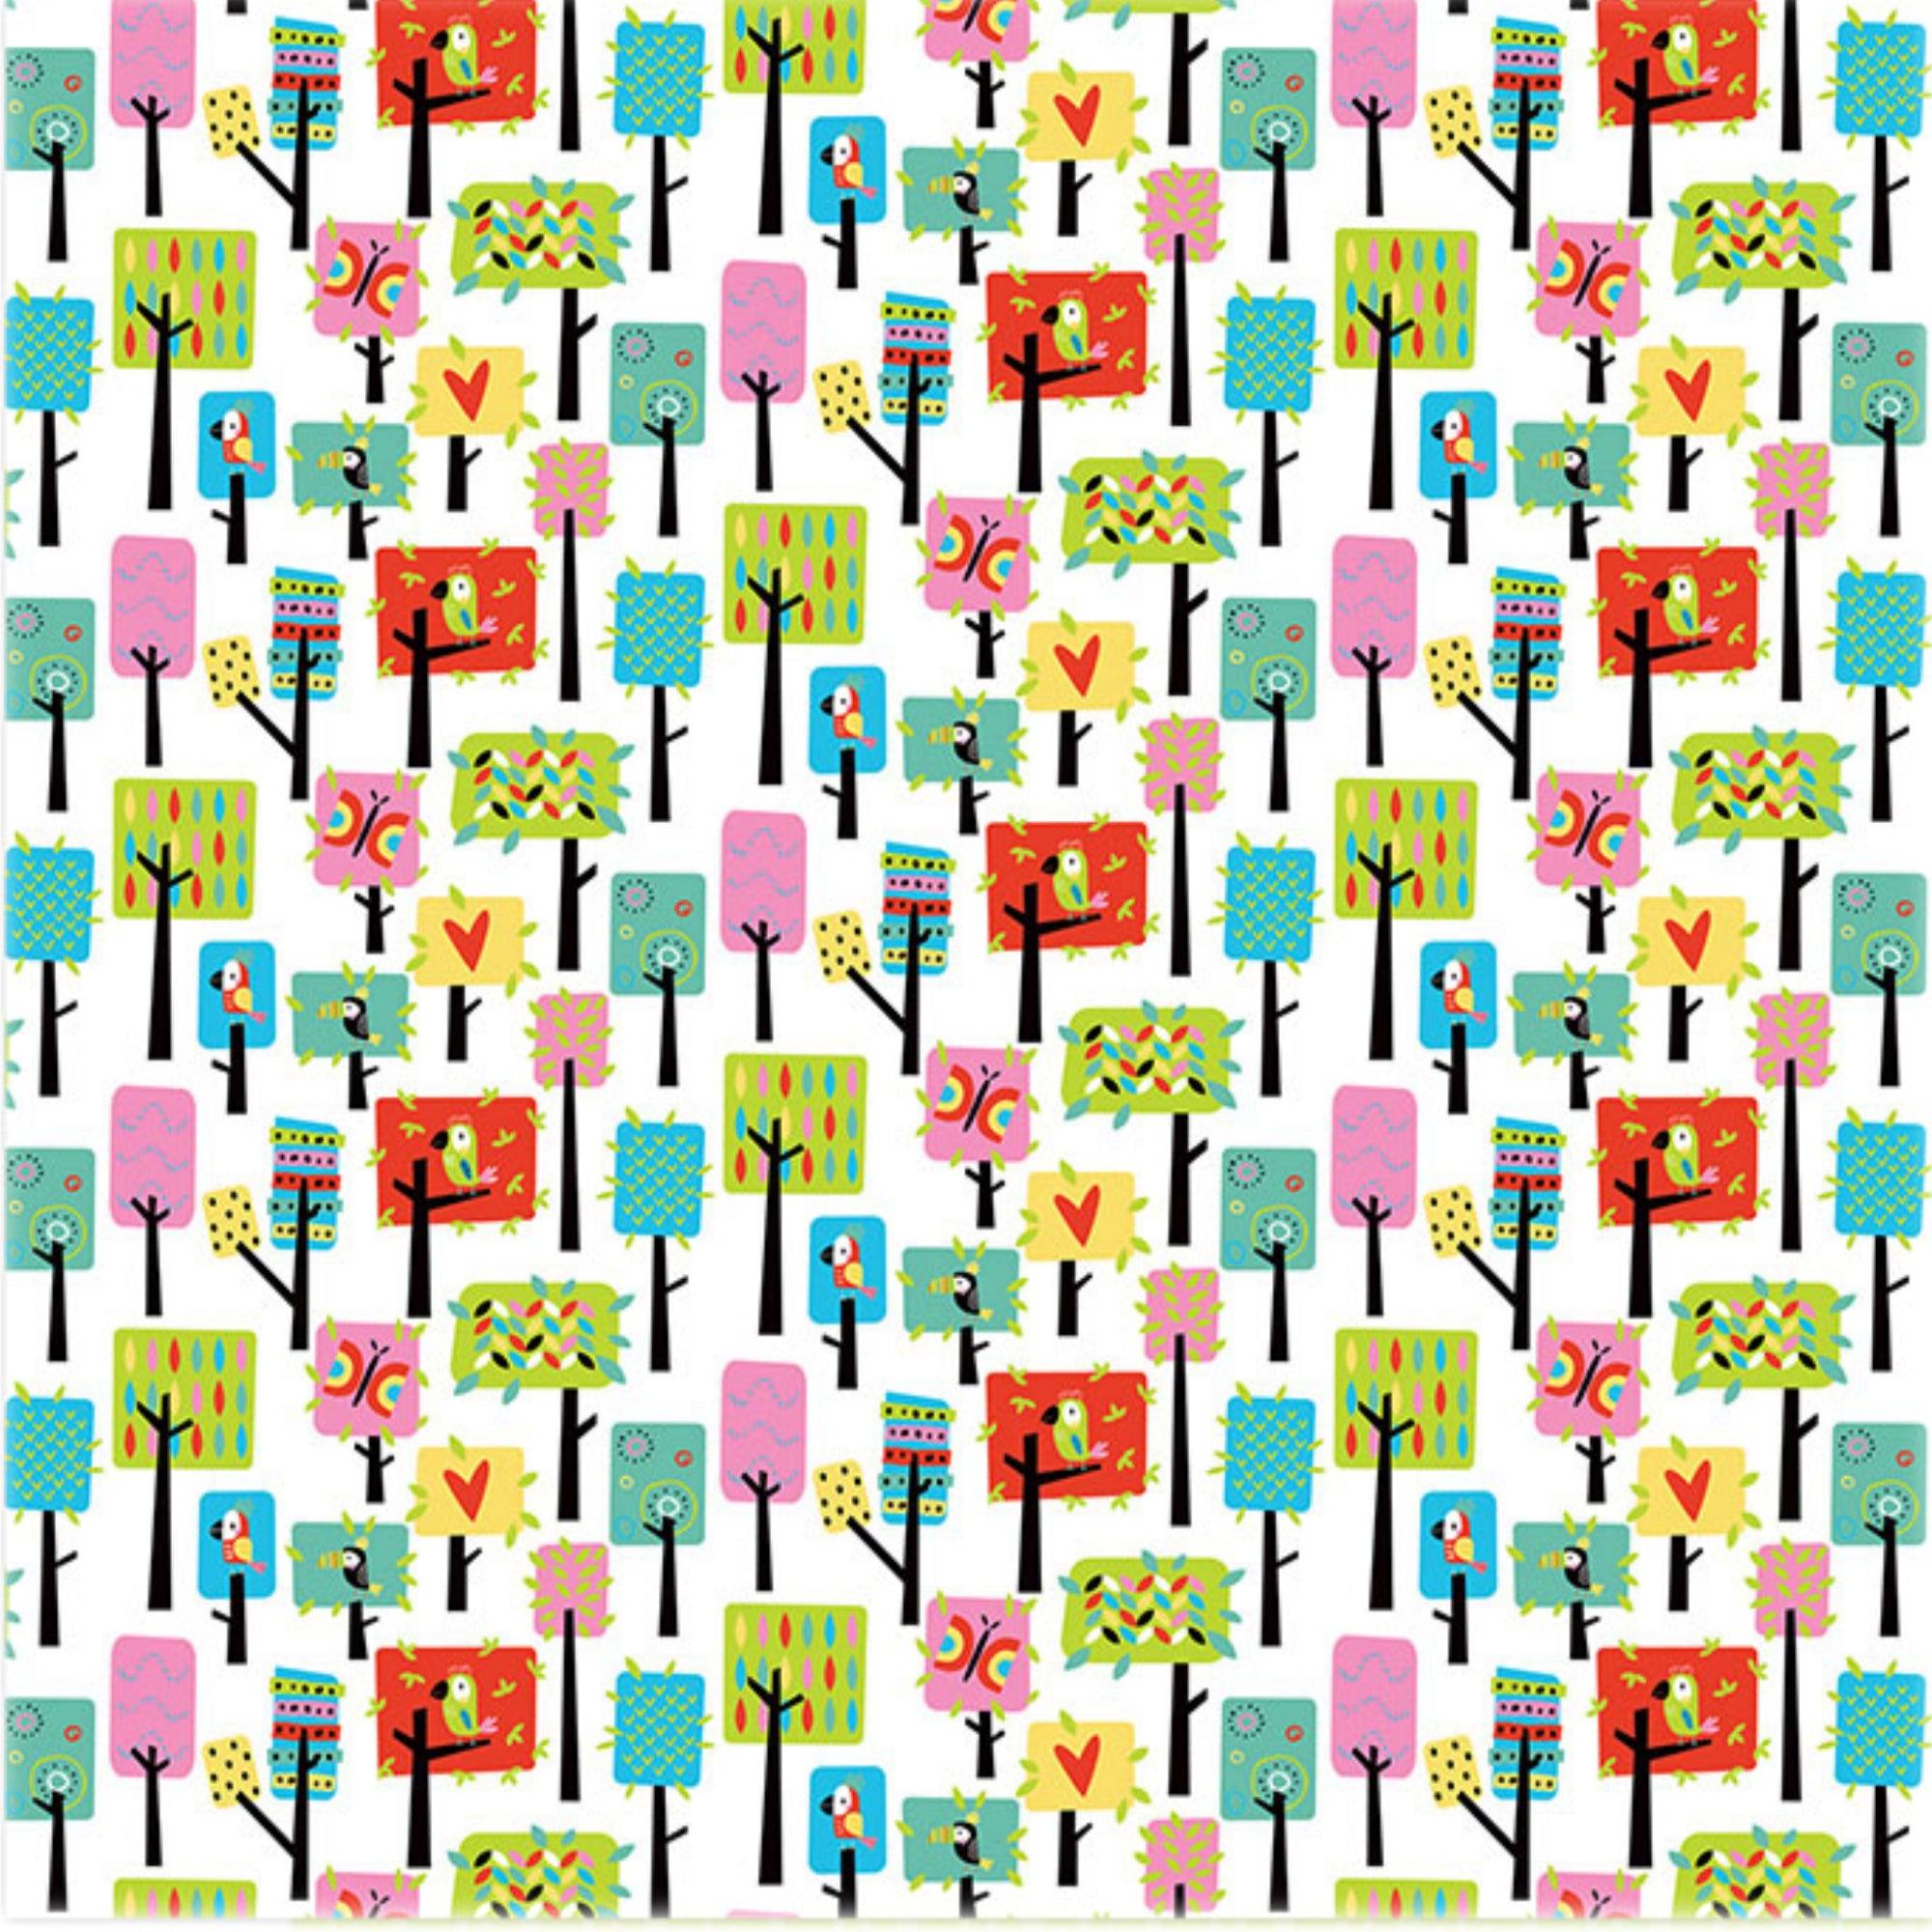 Birds Of A Feather Collection Nesting 12 x 12 Double-Sided Scrapbook Paper by Photo Play Paper - Scrapbook Supply Companies